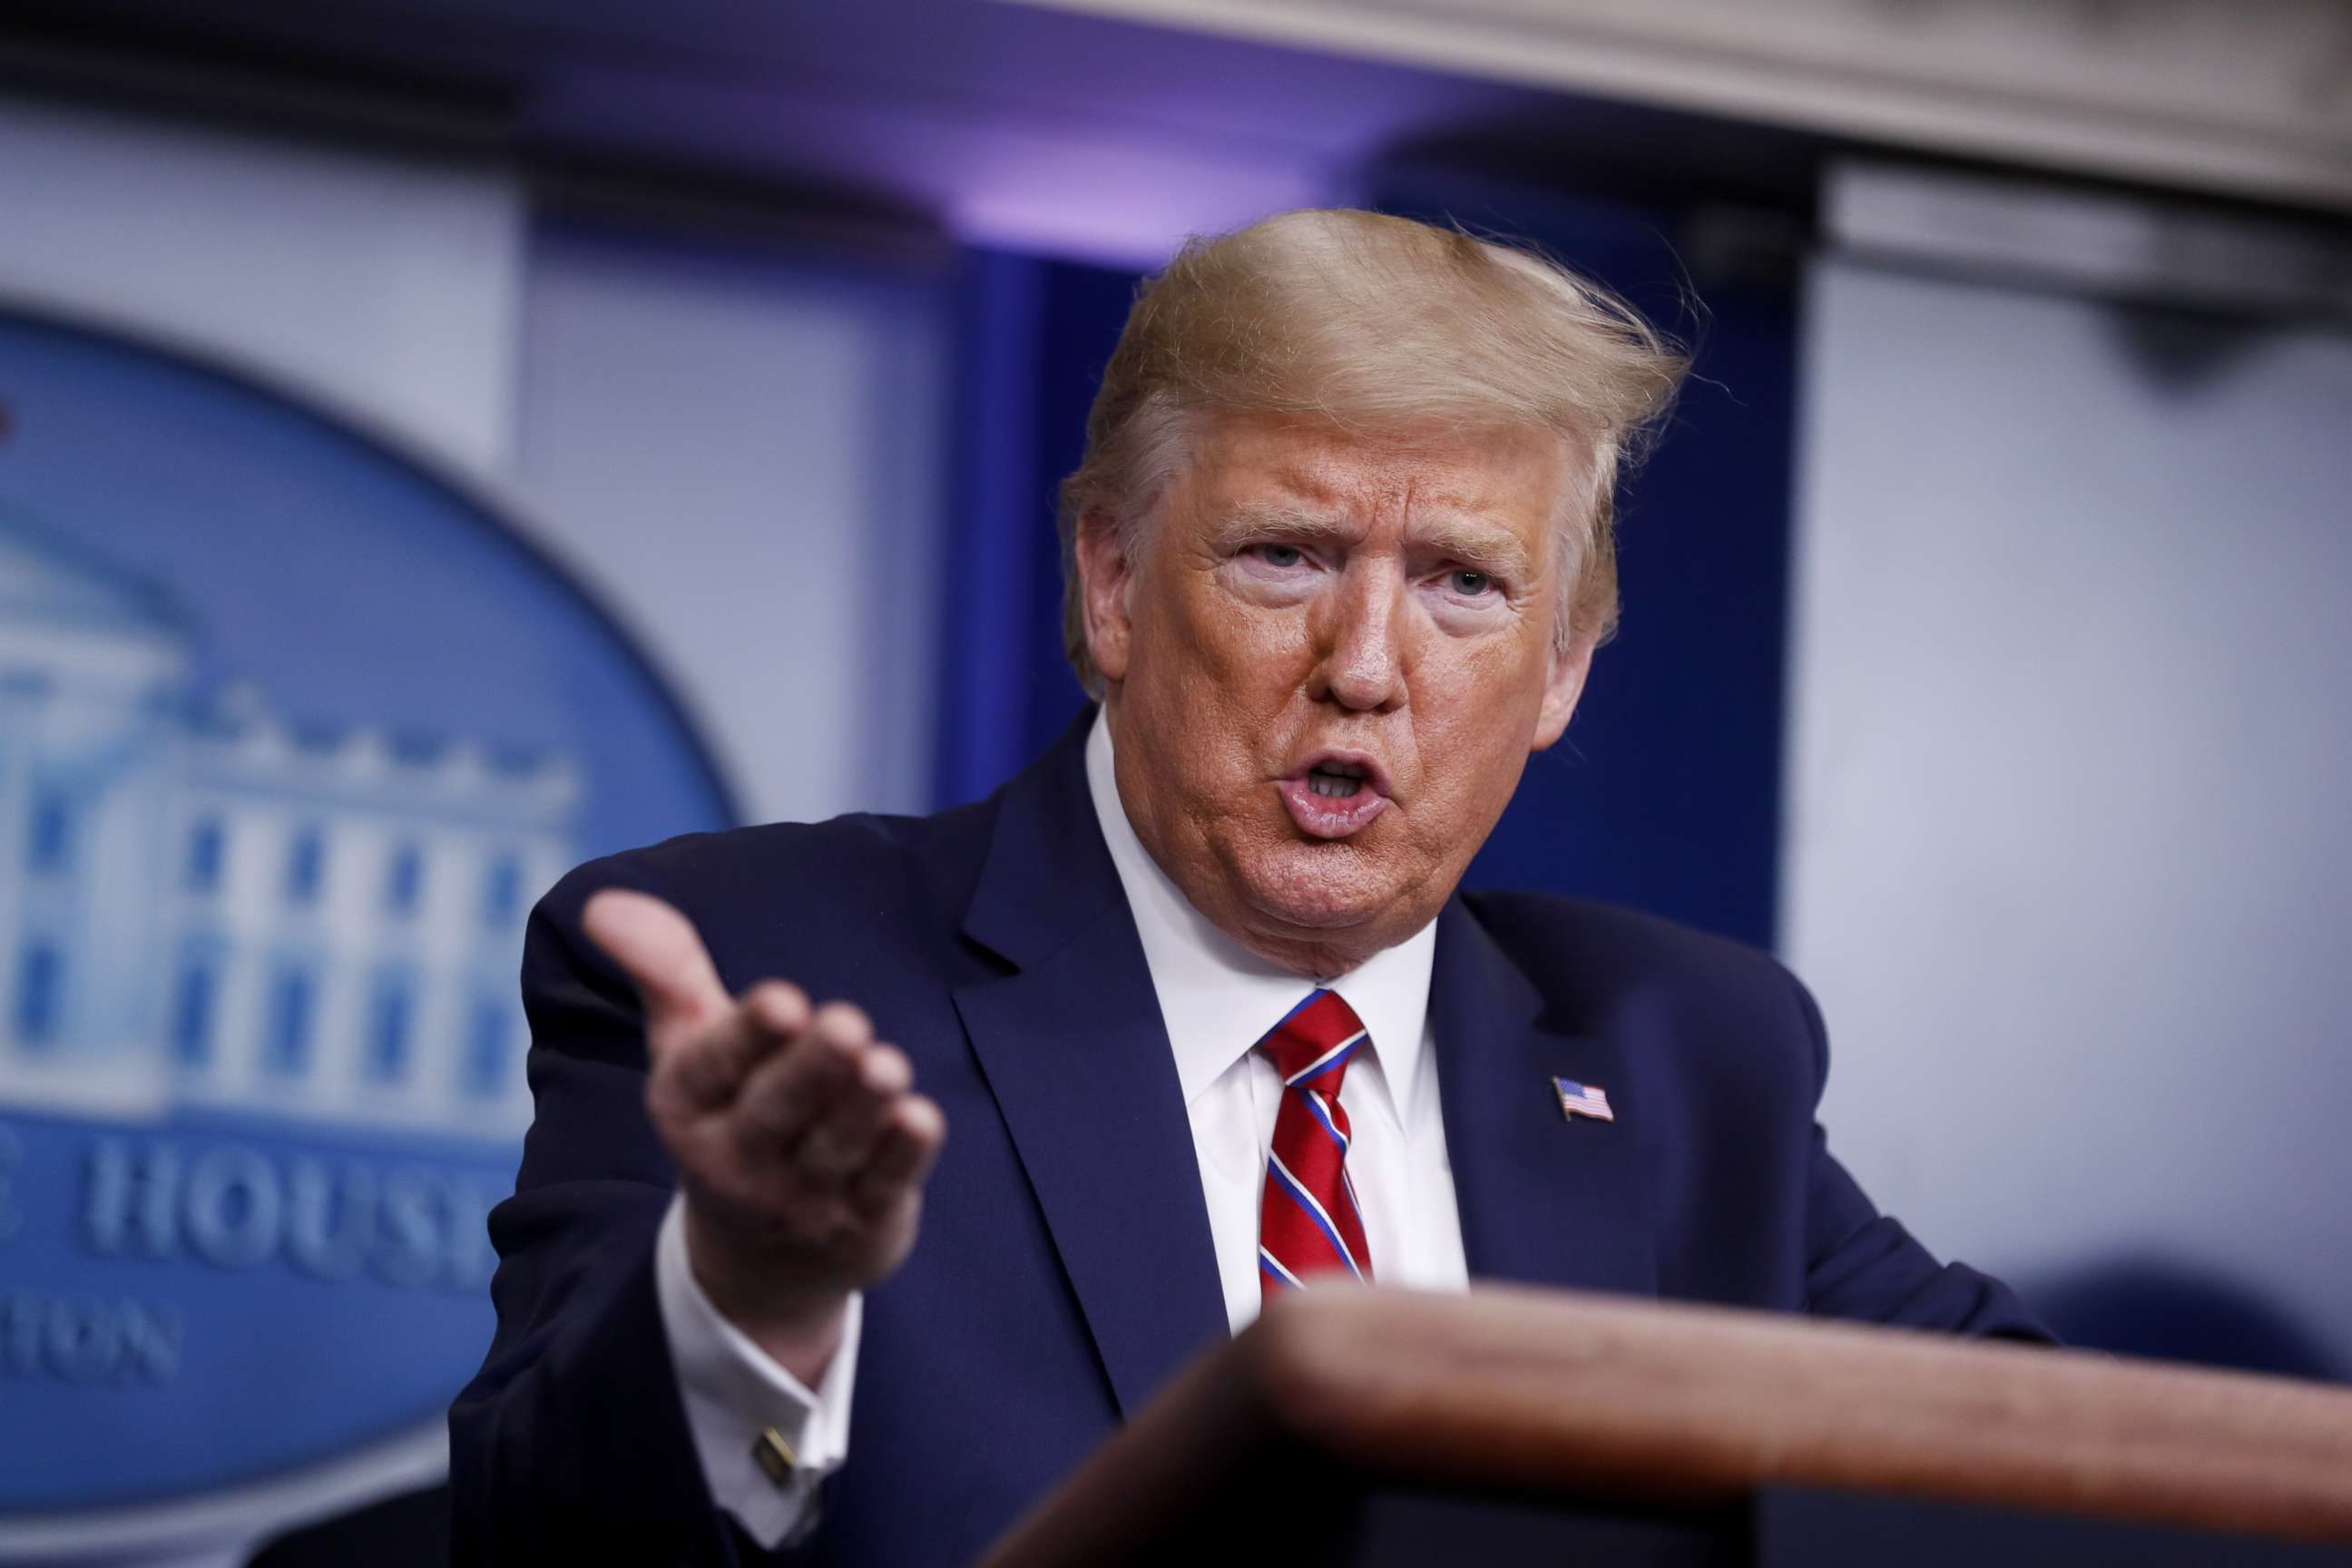 PHOTO: President Donald Trump speaks during a Coronavirus Task Force news conference in the briefing room of the White House in Washington, D.C., March 20, 2020.